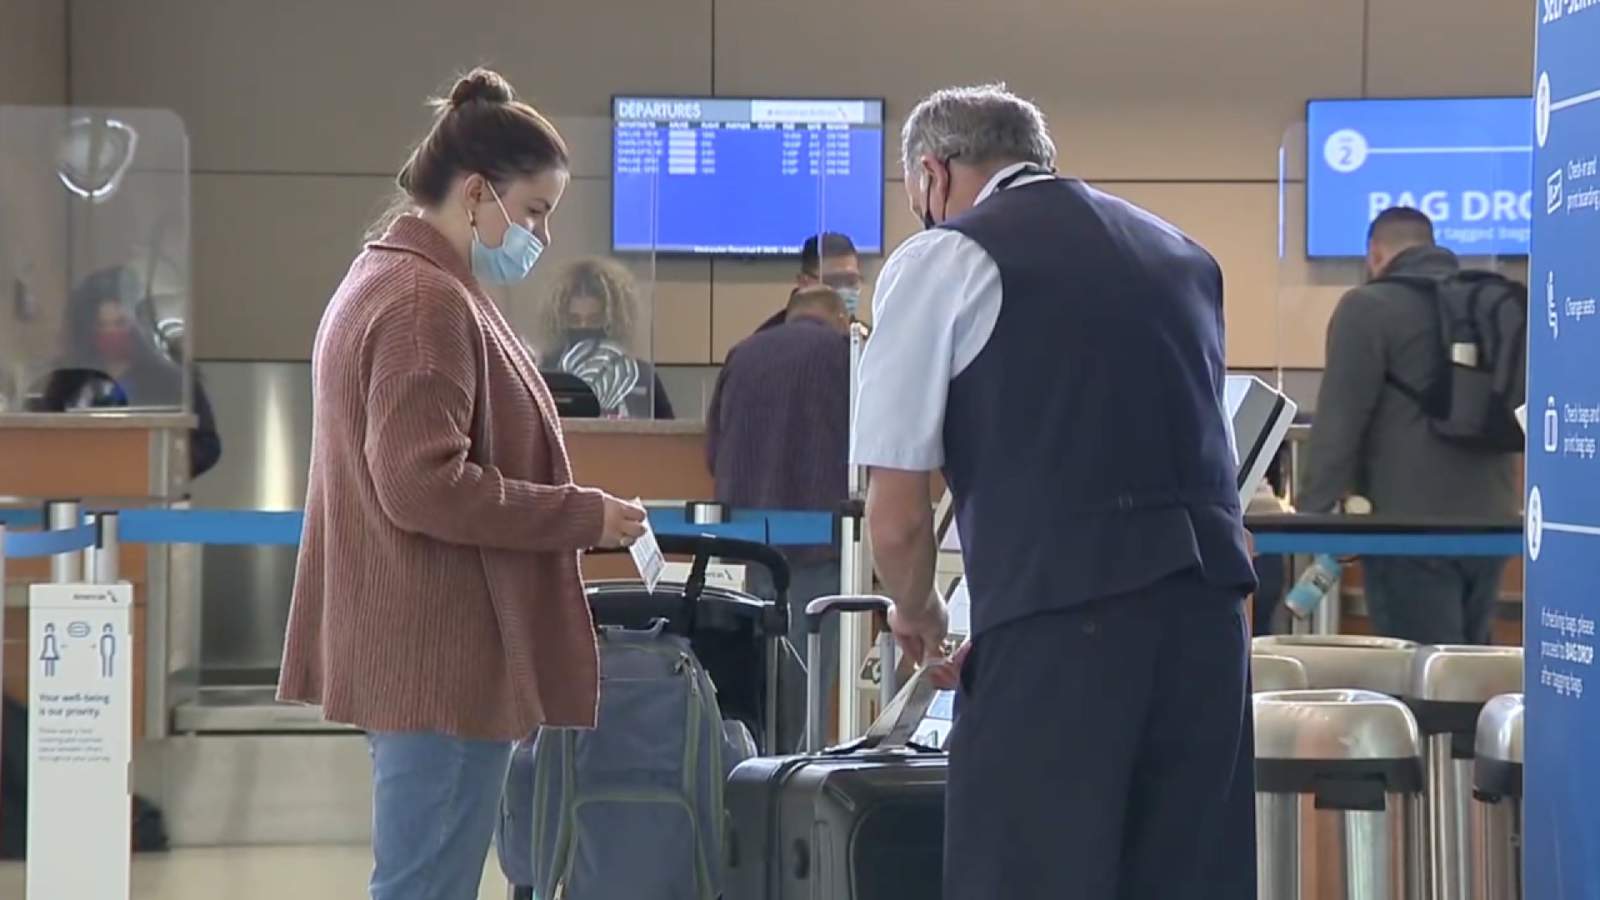 Spring break travelers still encouraged to follow COVID-19 safety protocols, airport officials say